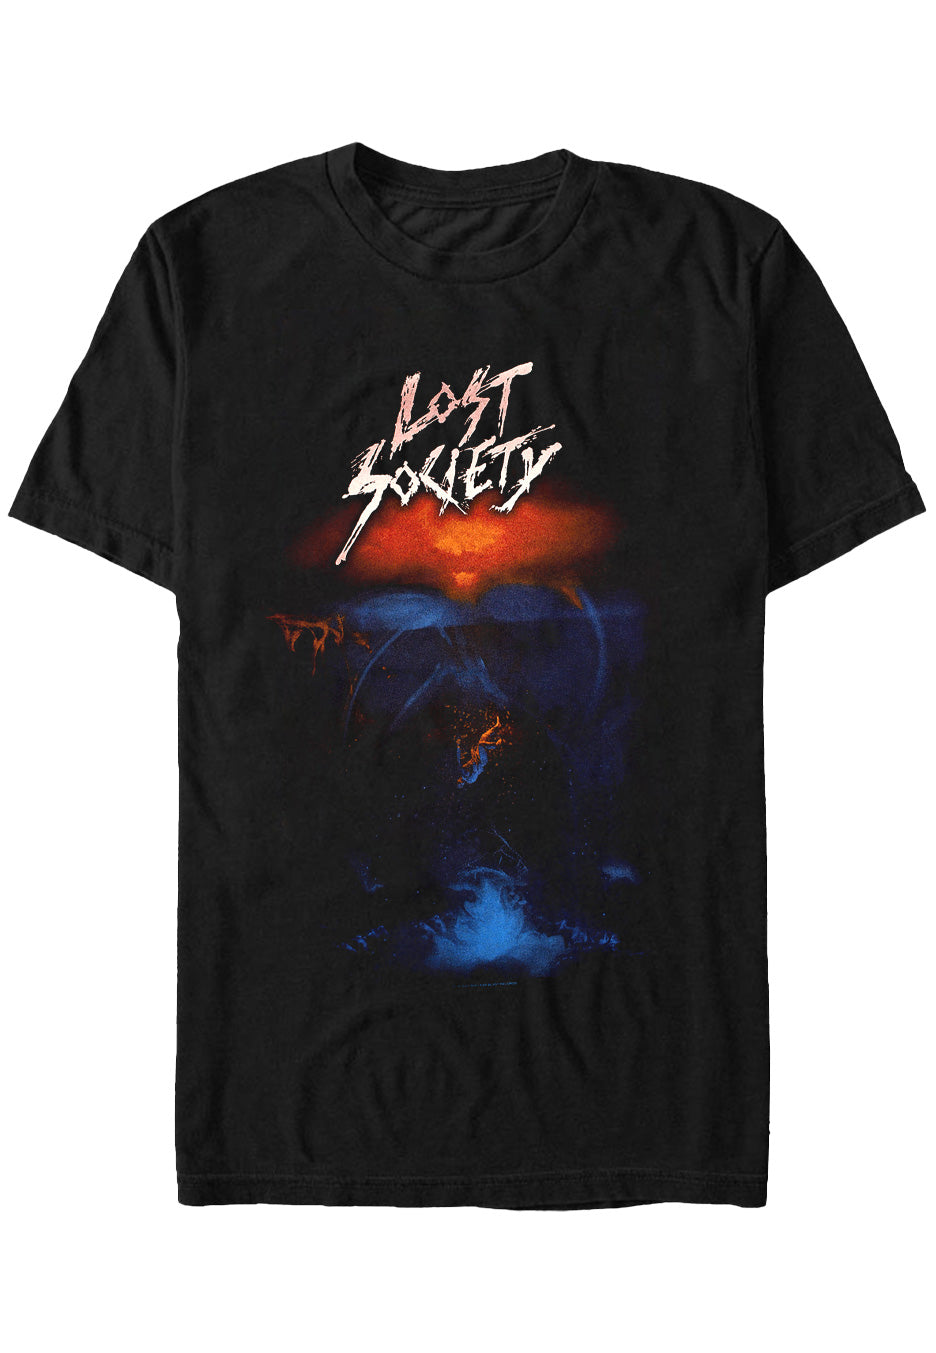 Lost Society - If The Sky Came Down - T-Shirt